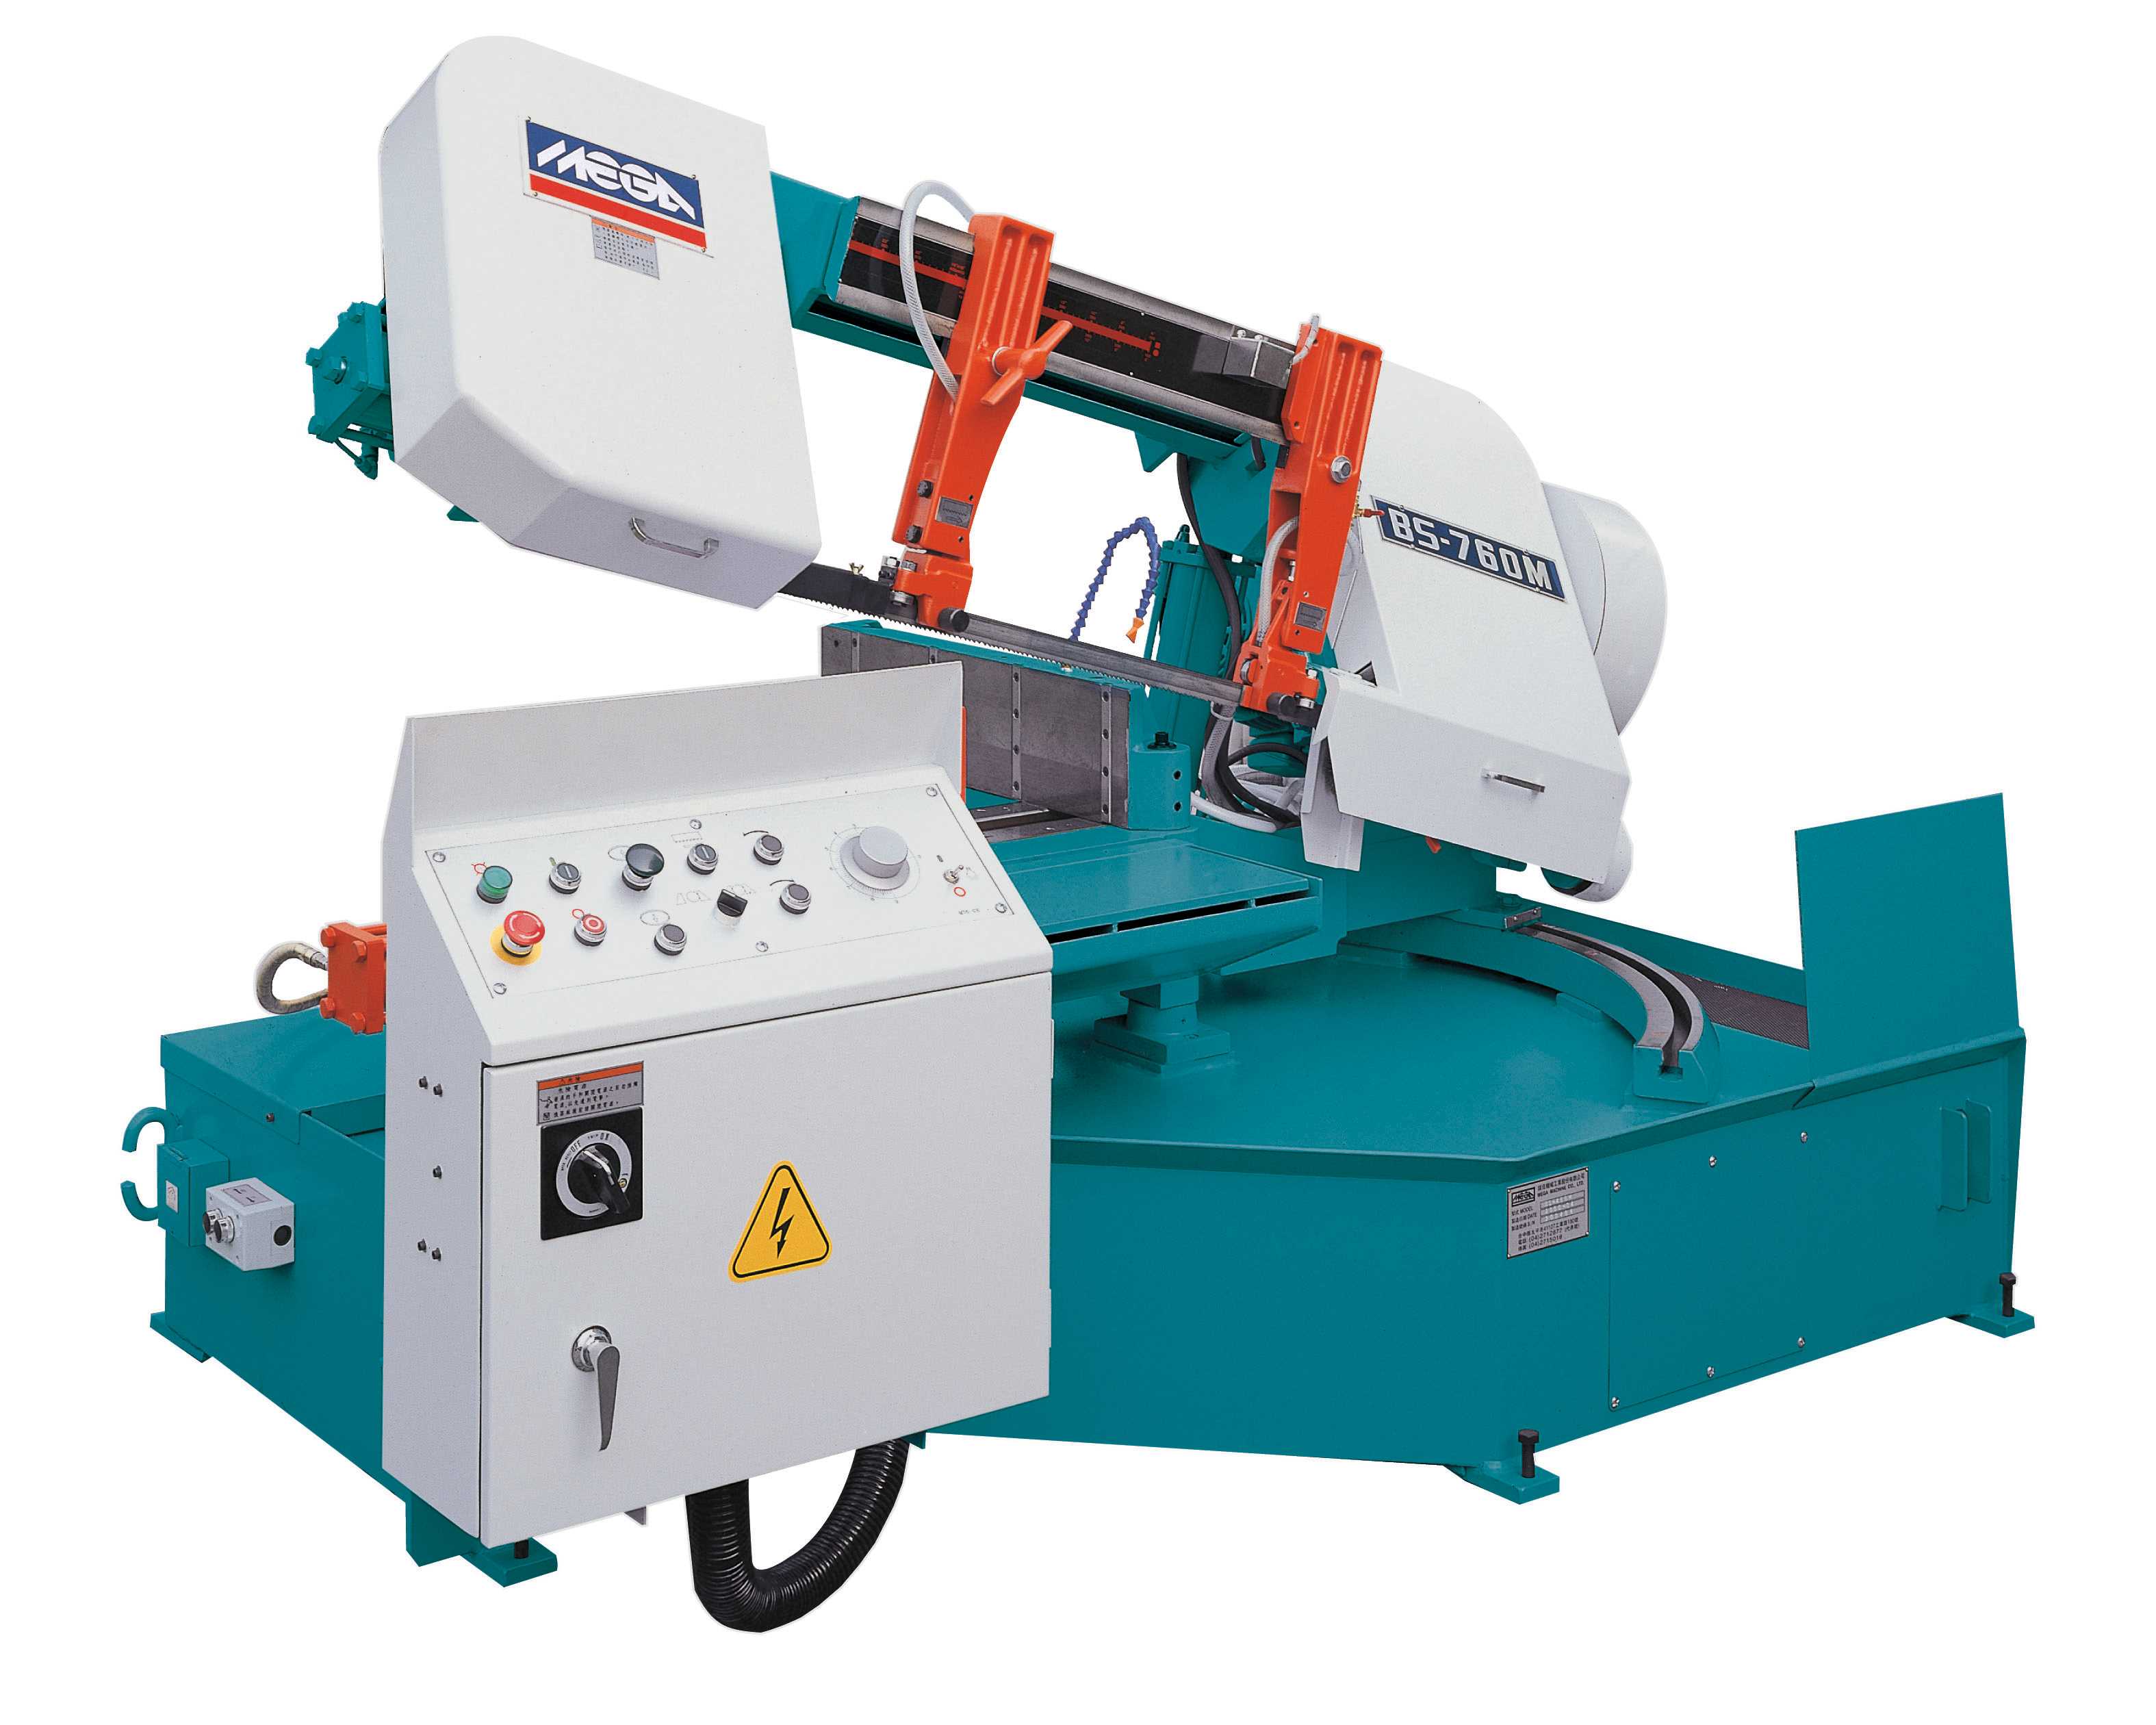 SEMI AUTOMATIC HORIZONTAL BANDSAWS (POWER TURNING TABLE MITRE CUTTING)